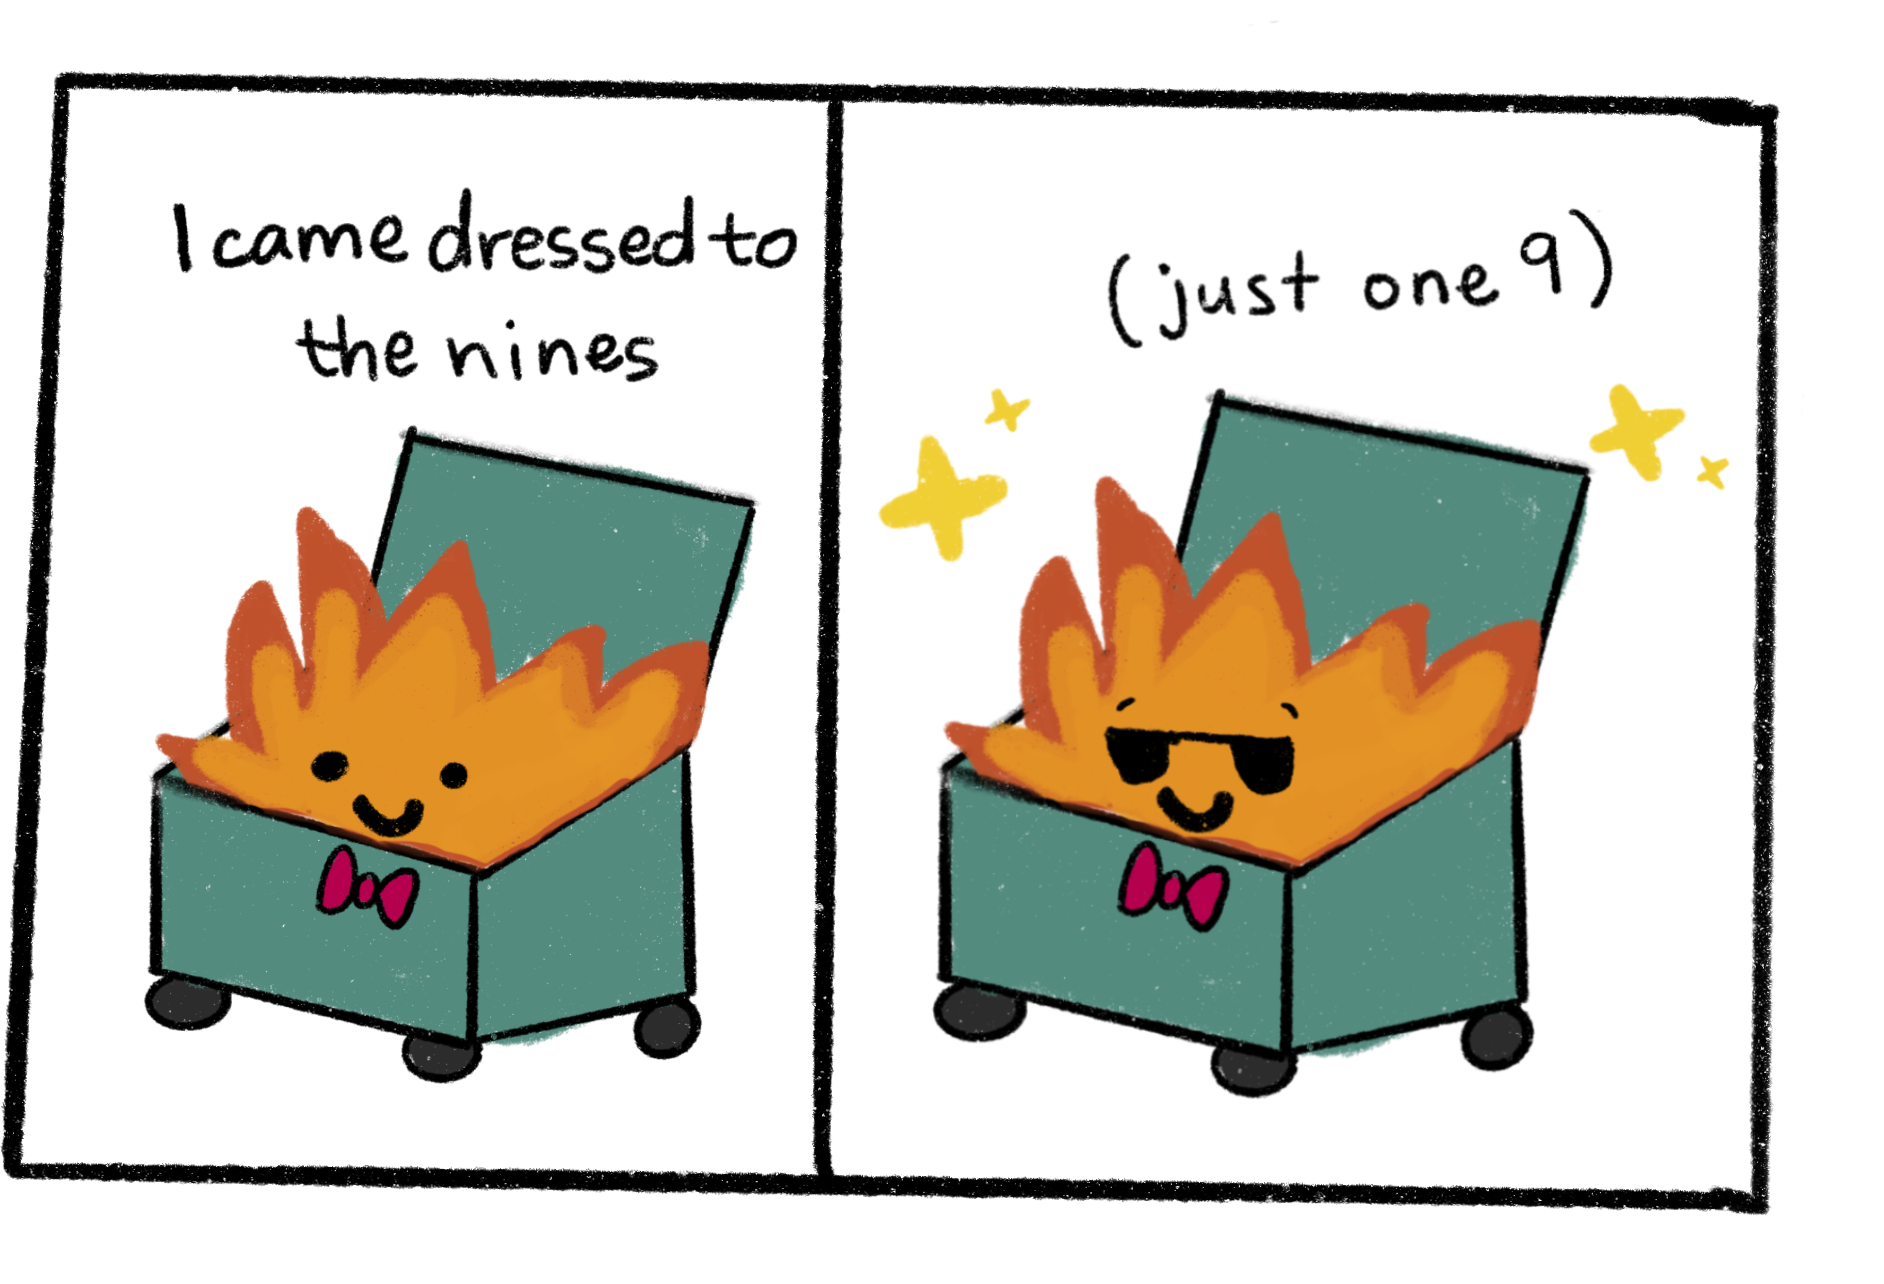 A dumpster fire wearing a bowtie and sunglasses says, "I came dressed to the nines. Just one nine."